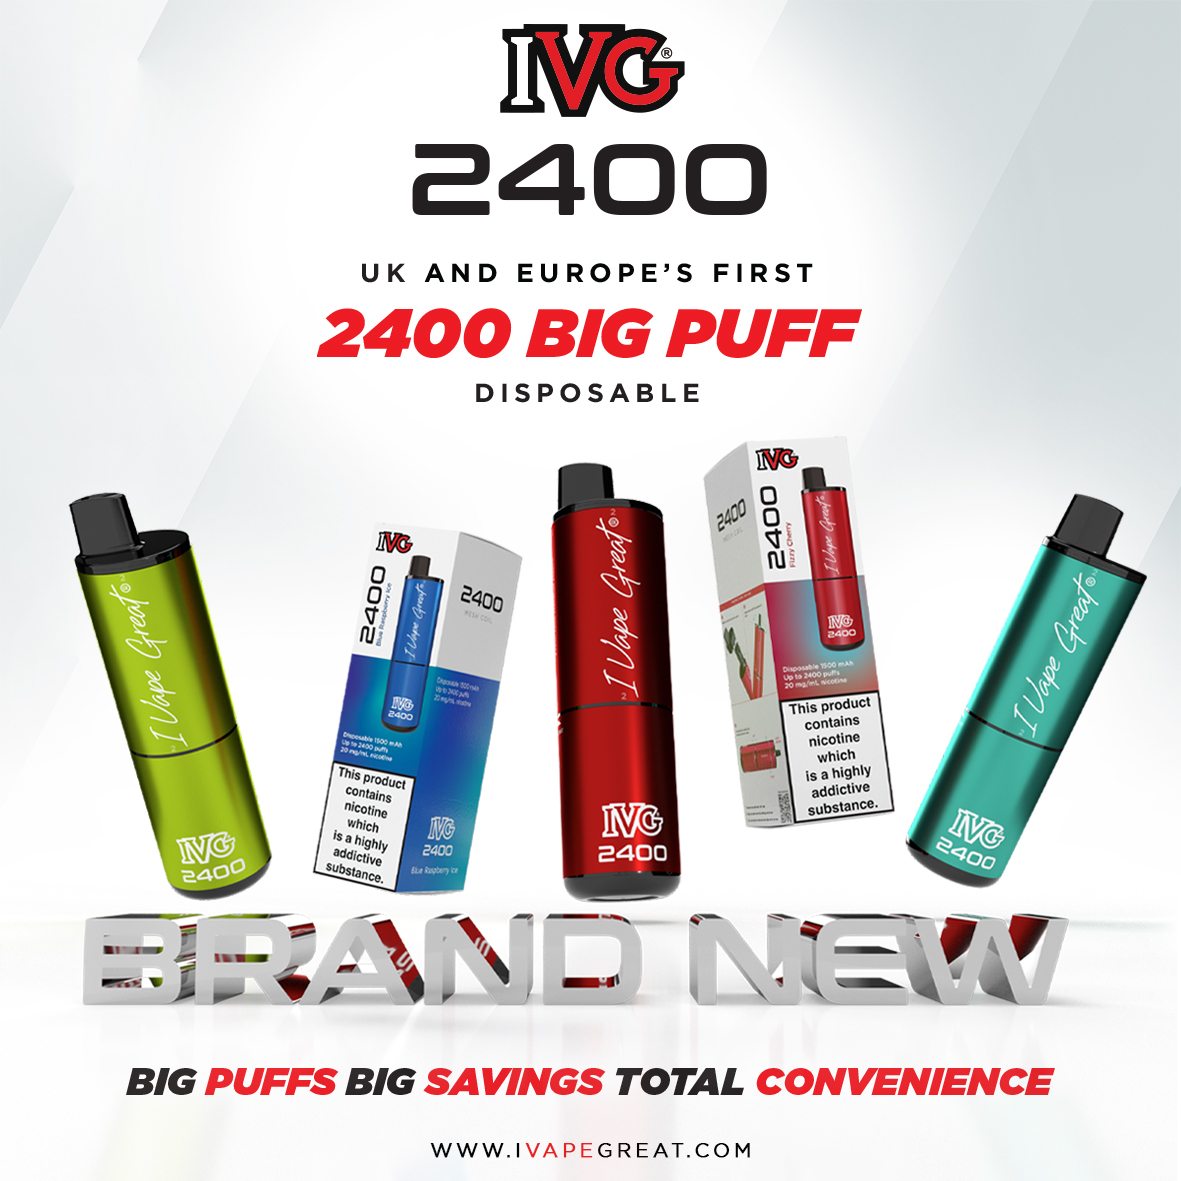 📣 Out Now 📣

IVG 2400 is the UK's first legal big puff disposable.

Big Puffs, Big Savings, Total Convenience.

#ivapegreat #newproduct #outnow #IVG2400 #newrelease